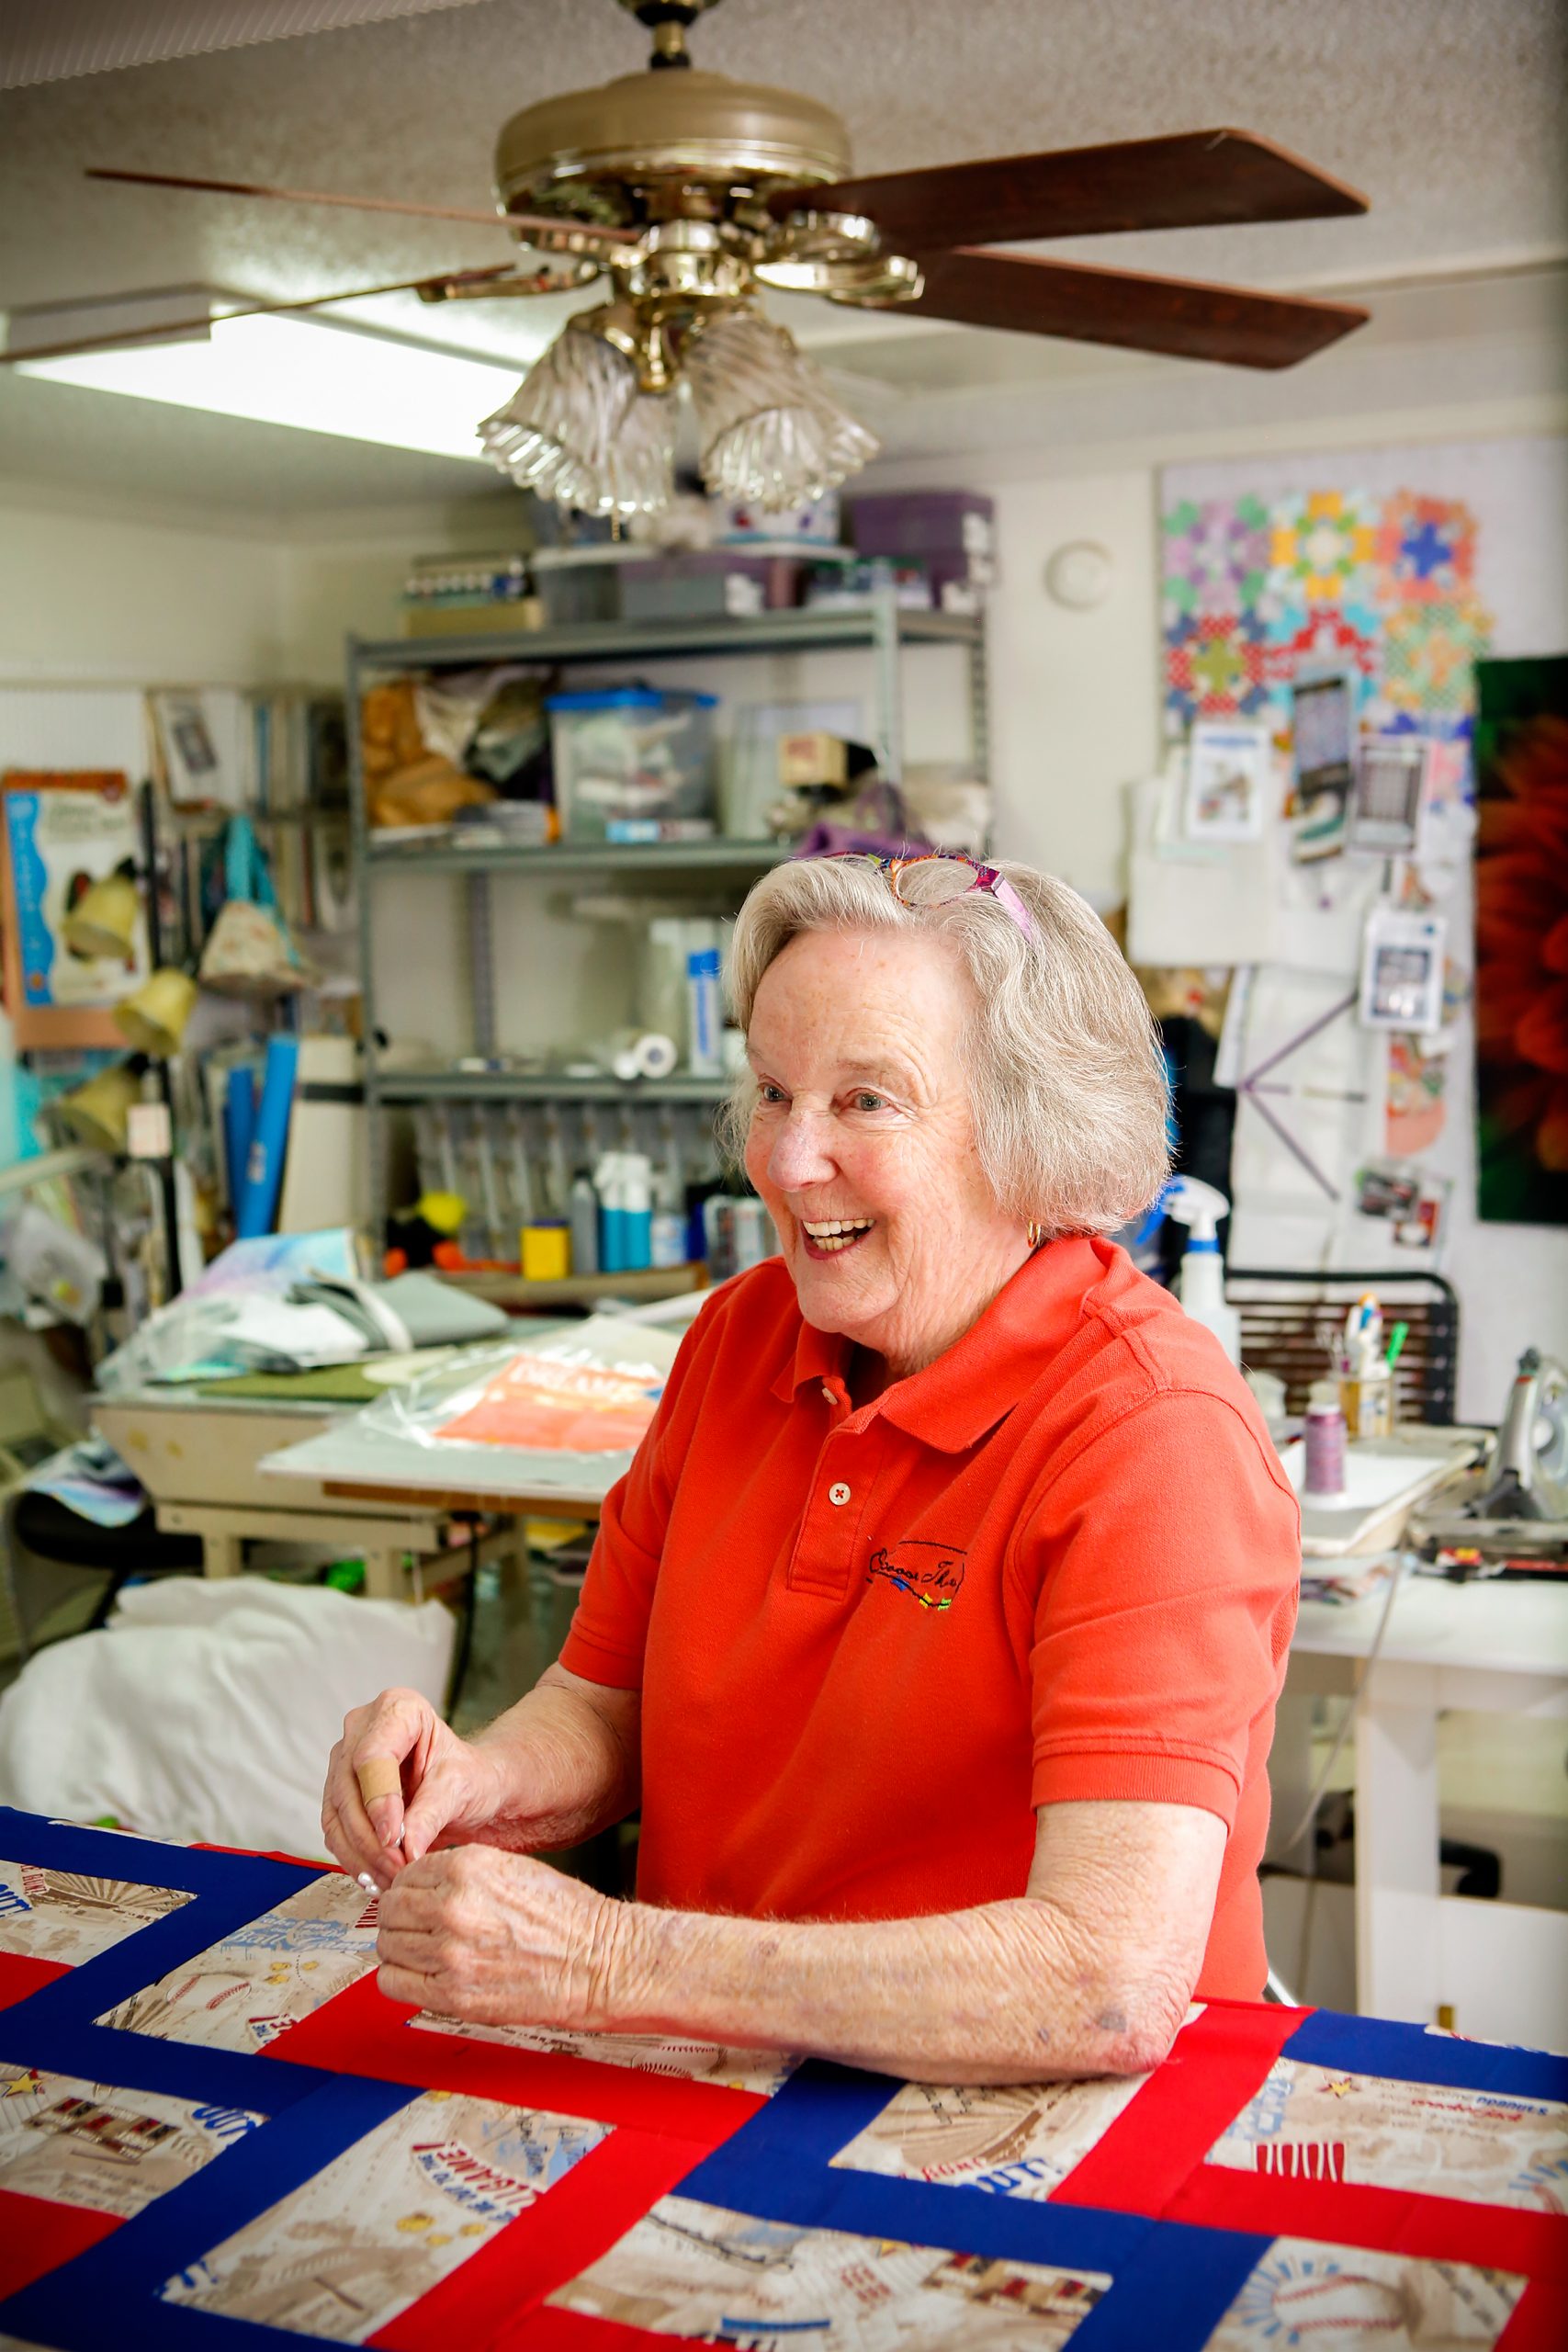 Joyce Greer sees quilting as a form of art. She has two long arm quilting machines, which assist in easily sewing quilt backing, batting, and tops together. 